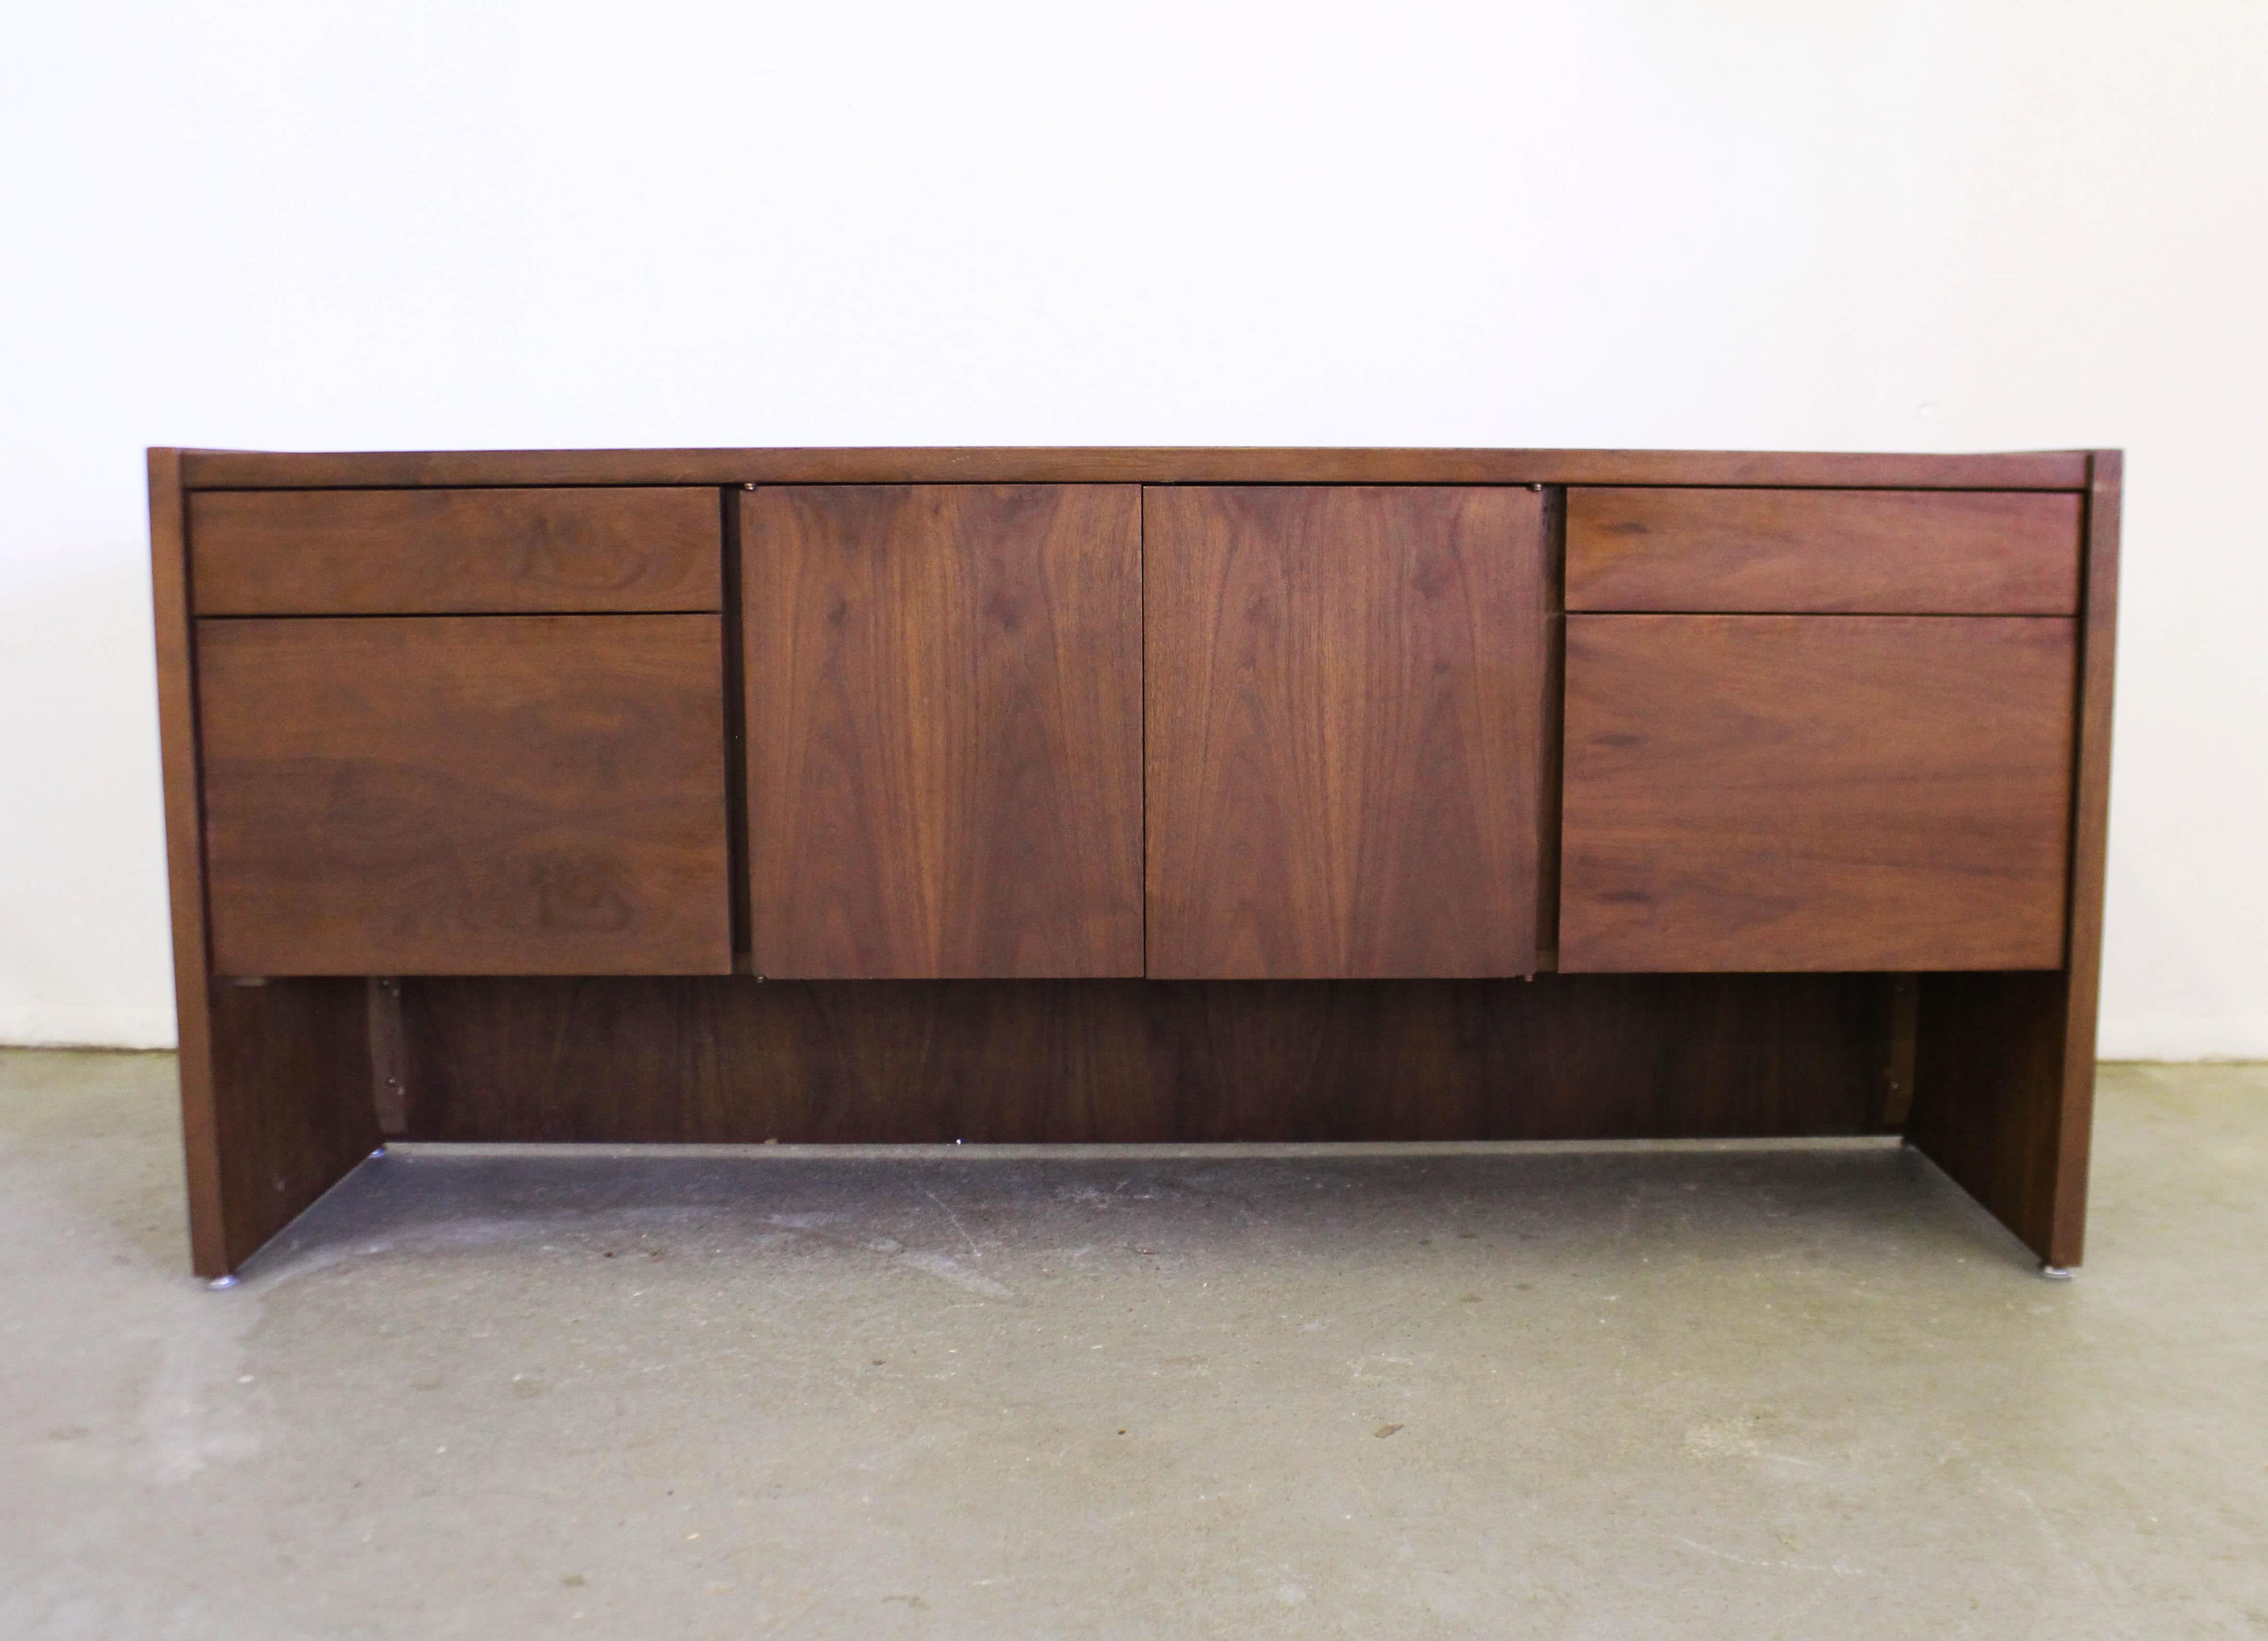 Offered is a vintage Mid-Century Modern credenza by Gunlocke. Looks to be walnut. Features four drawers with hidden pulls, metal tracks, and two center doors with inner adjustable shelving. Includes two file drawers with metal inserts. Overall, in